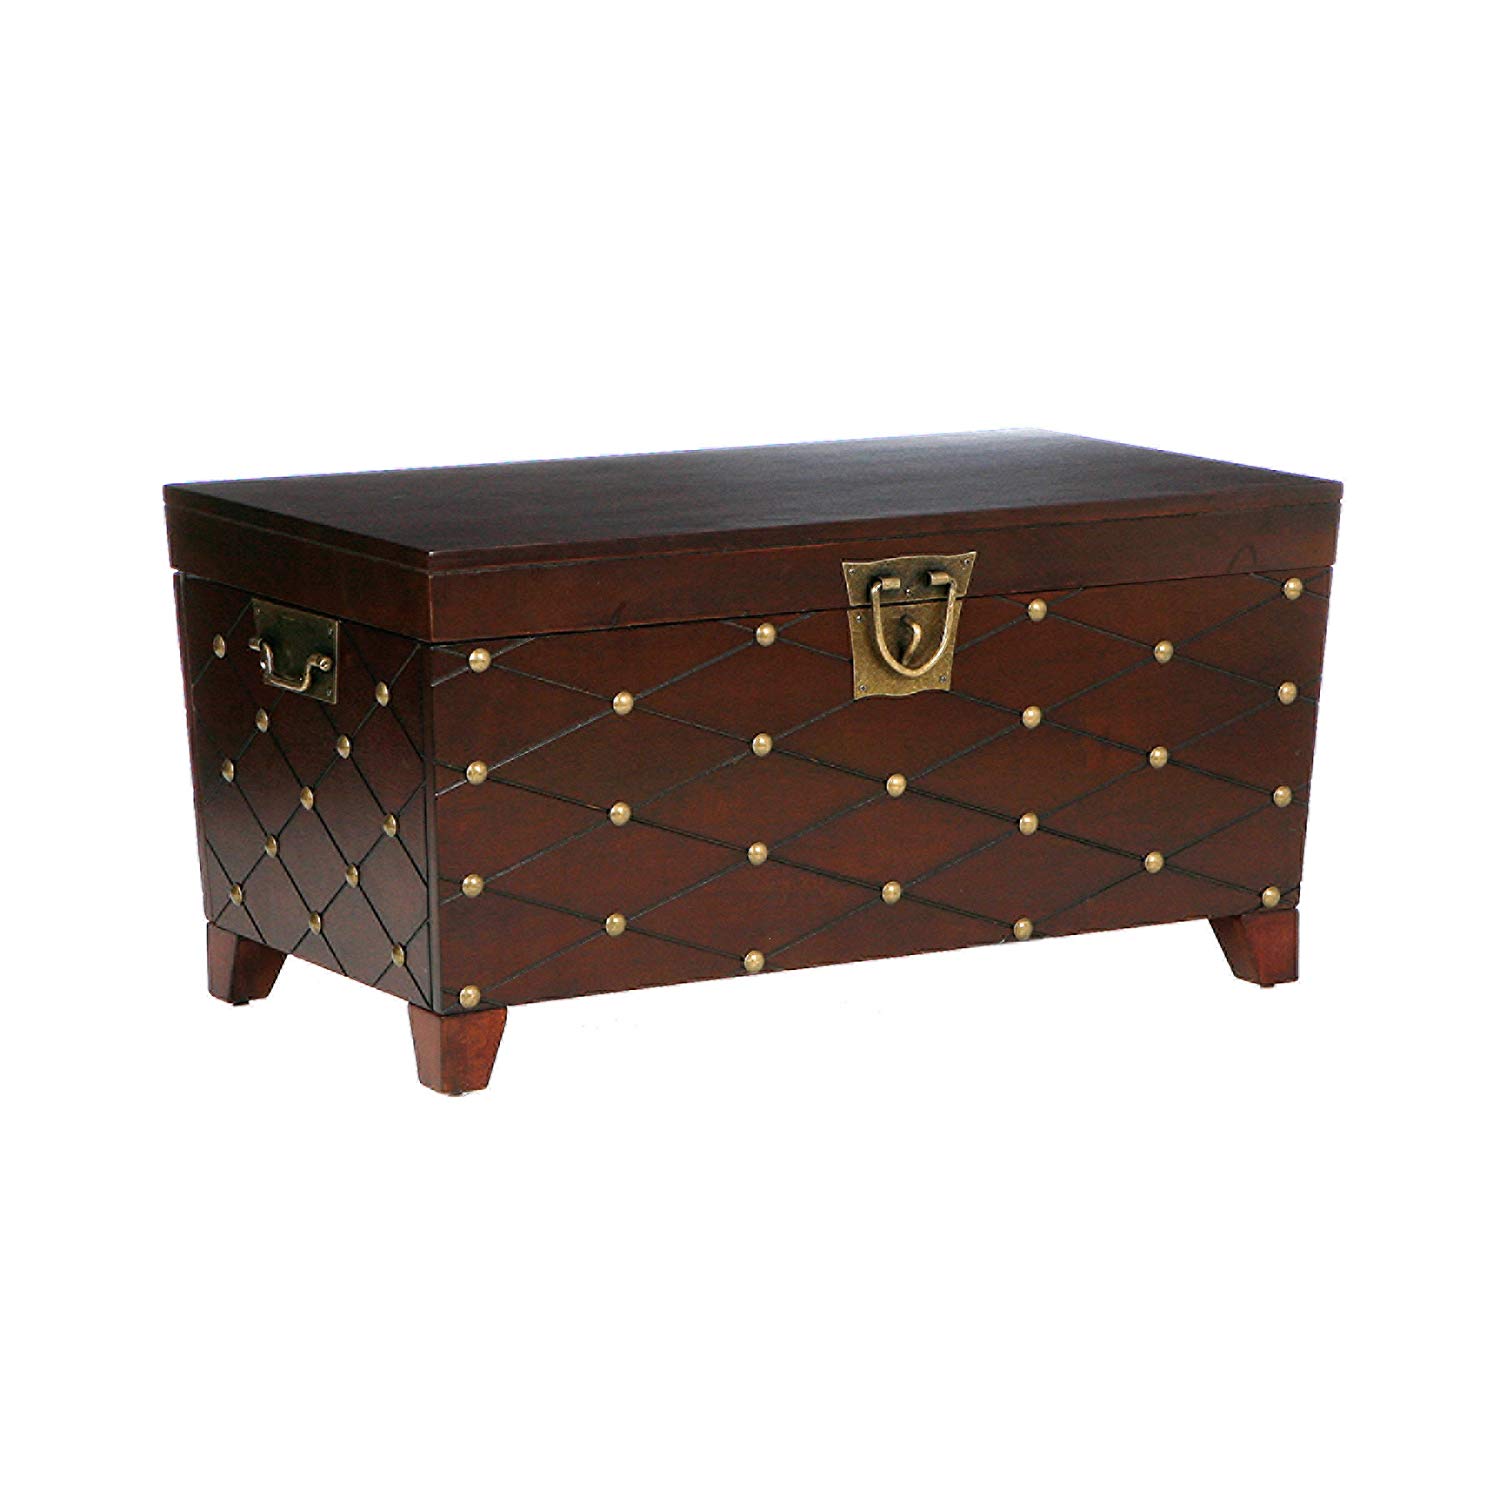 southern enterprises nailhead cocktail table storage accent with nailheads trunk espresso finish kitchen dining whole patio furniture ashley end tables quilted runner patterns